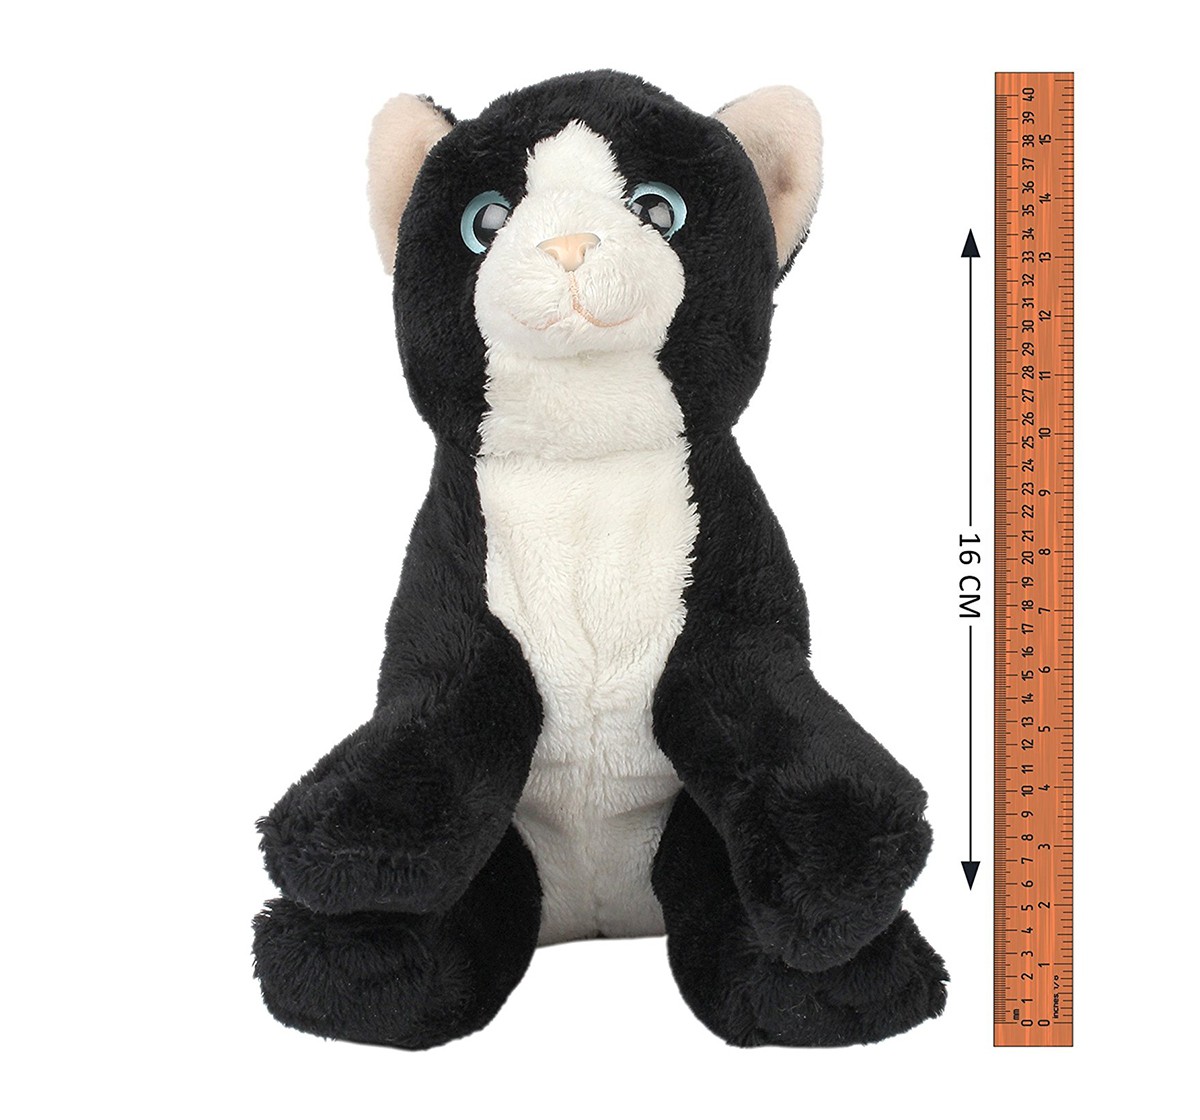  Hamleys Floppy  Black And White Cat Pet Animal With Beans Plush Soft Toy For Kids, age 2Y+ - 17 Cm (Black)